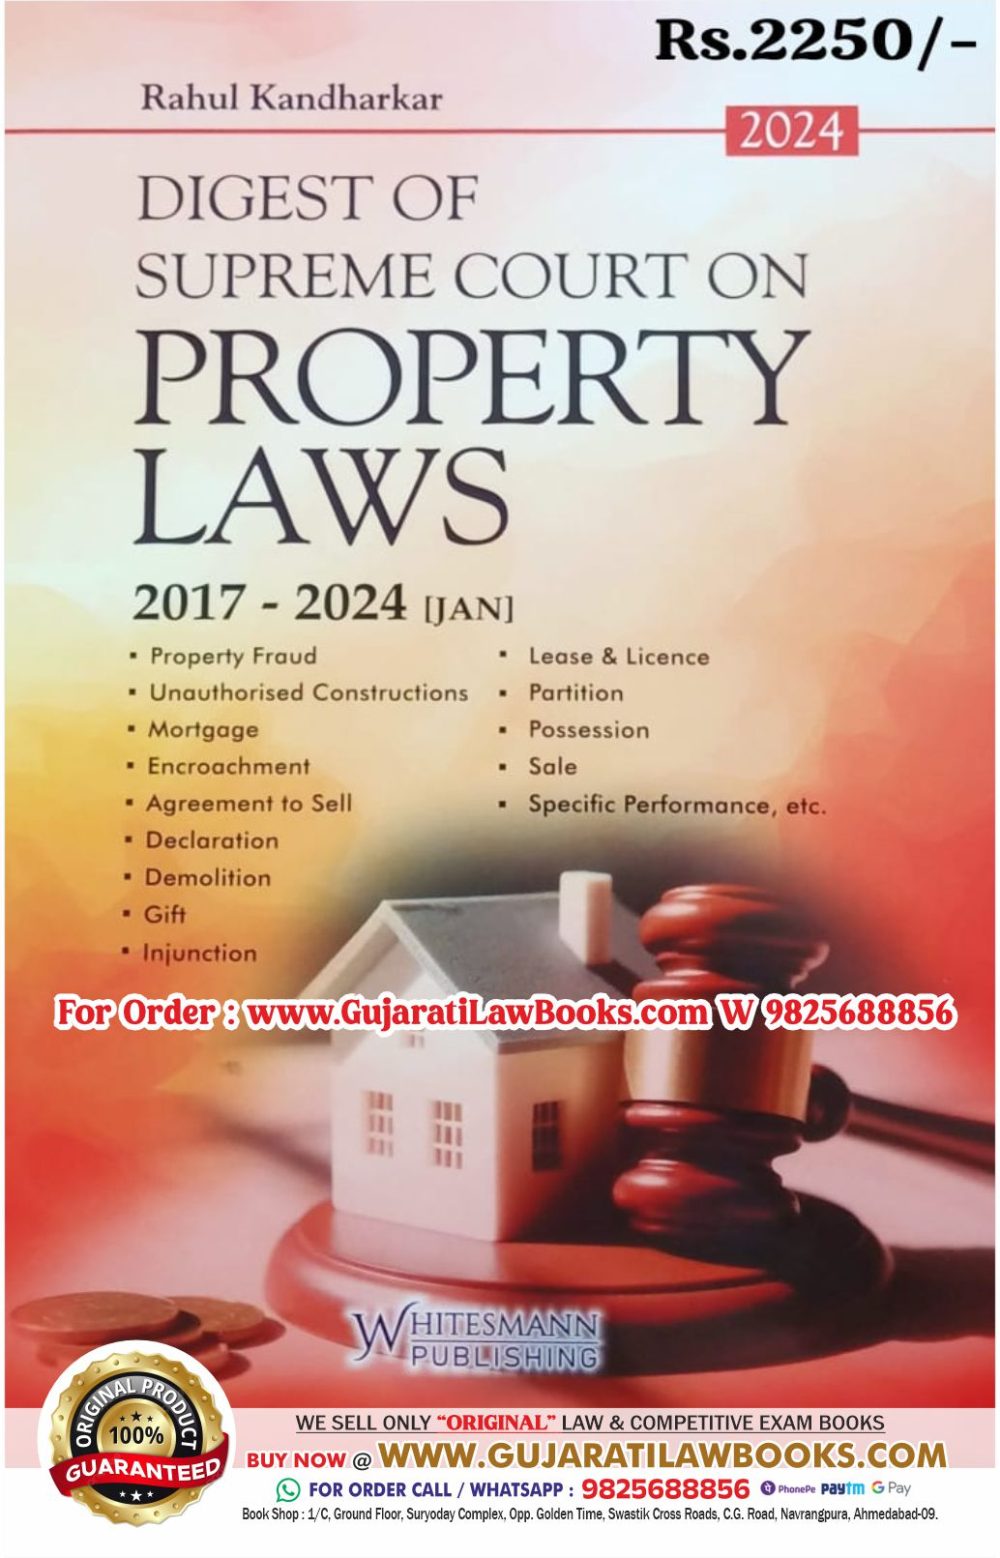 Digest of Supreme Court on PROPERTY LAWS by Rahul Kandharkar - Latest March 2024 Edition Whitesmann